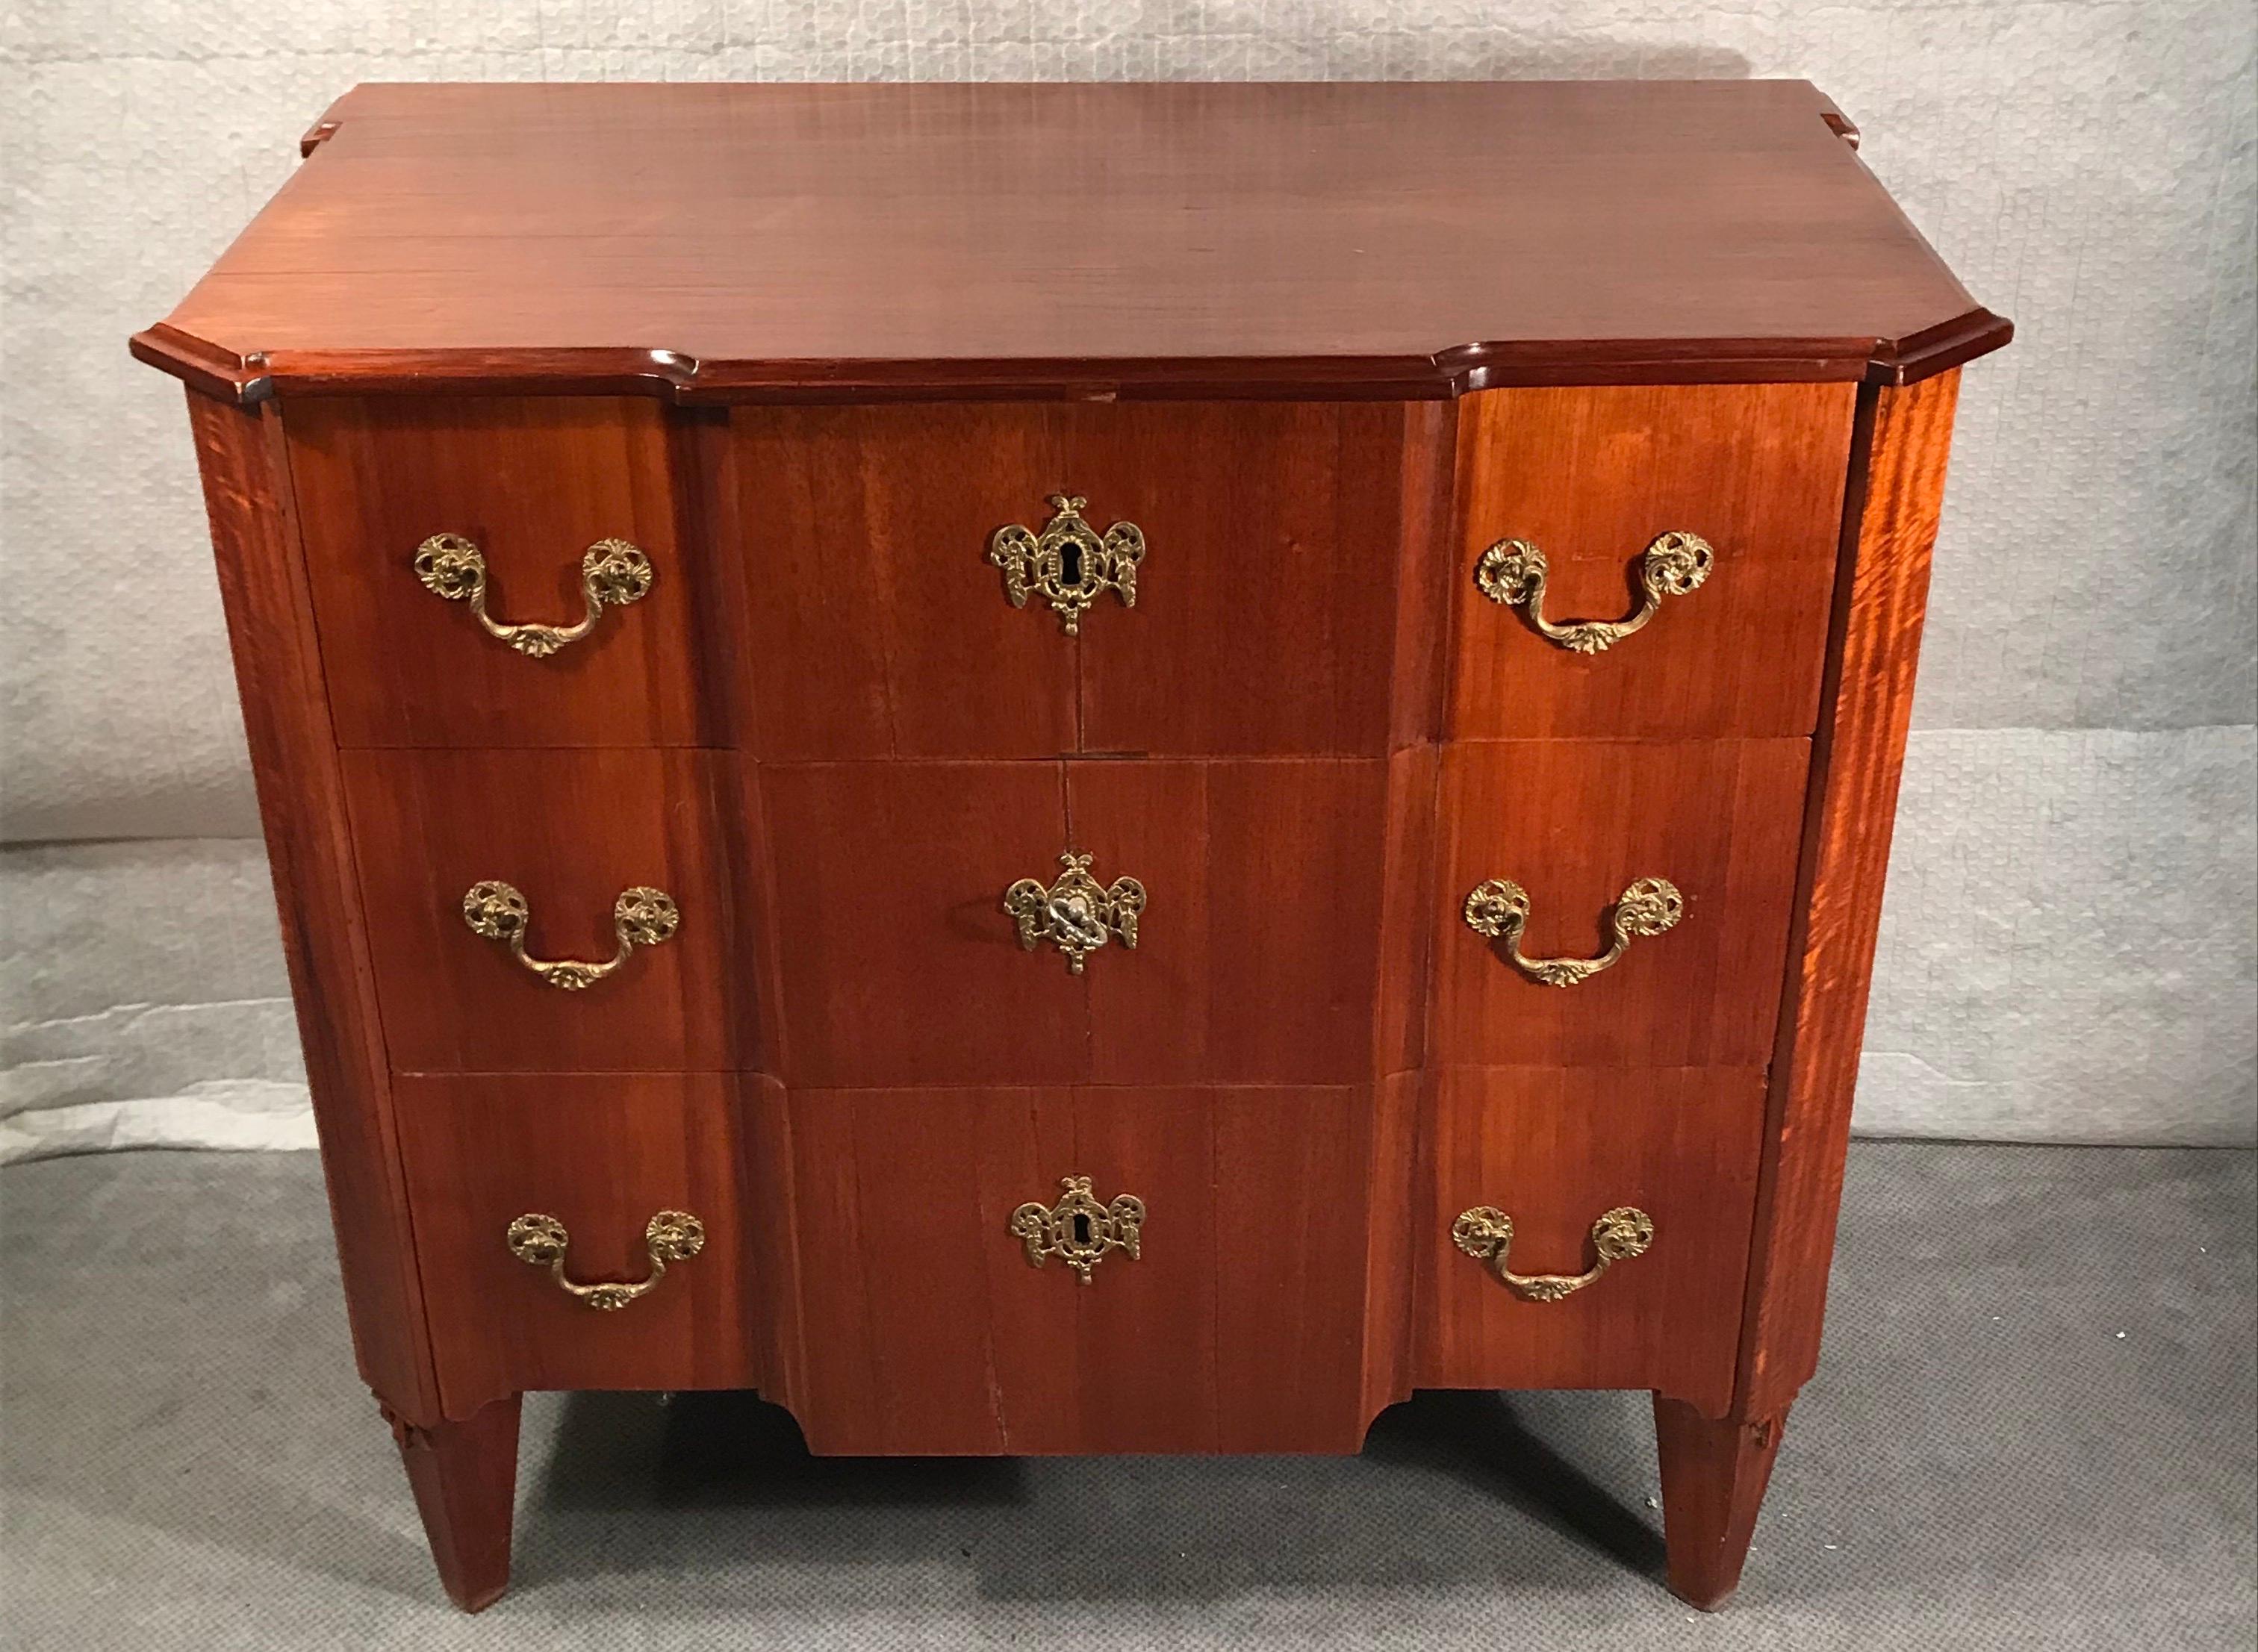 Gustavian chest of drawers, Sweden, 1780-1800.
This elegant chest of drawers is made of yew tree and has a mahogany veneer. Furthermore, it has its original bronze fittings and escutcheons. The three drawer commode stands on four pointed feet. The